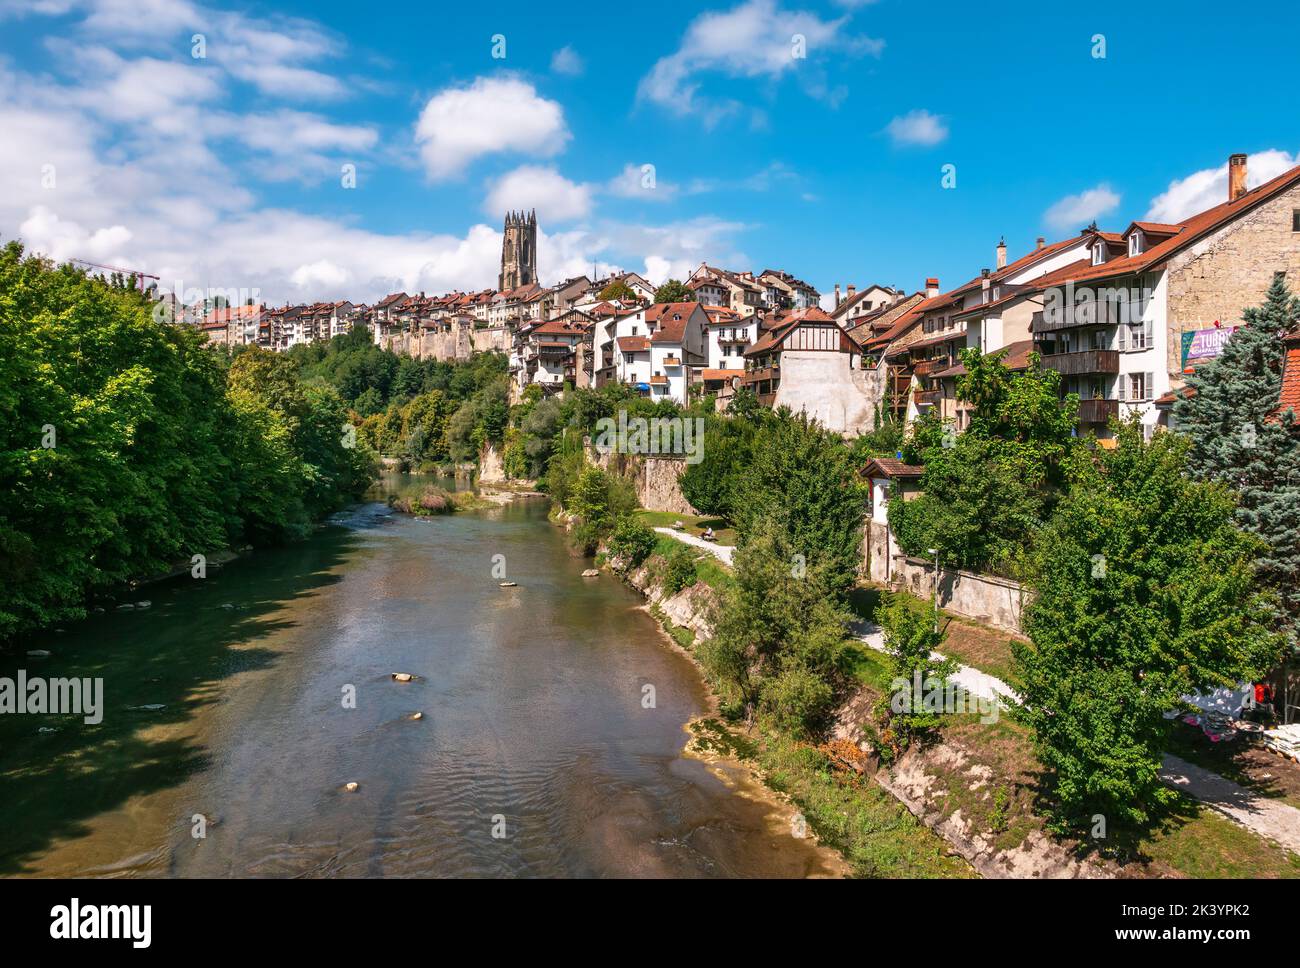 Fribourg, Switzerland - August 31, 2022: Cityscape of Freiburg city, one of the best preserved medieval old towns in Switzerland Stock Photo